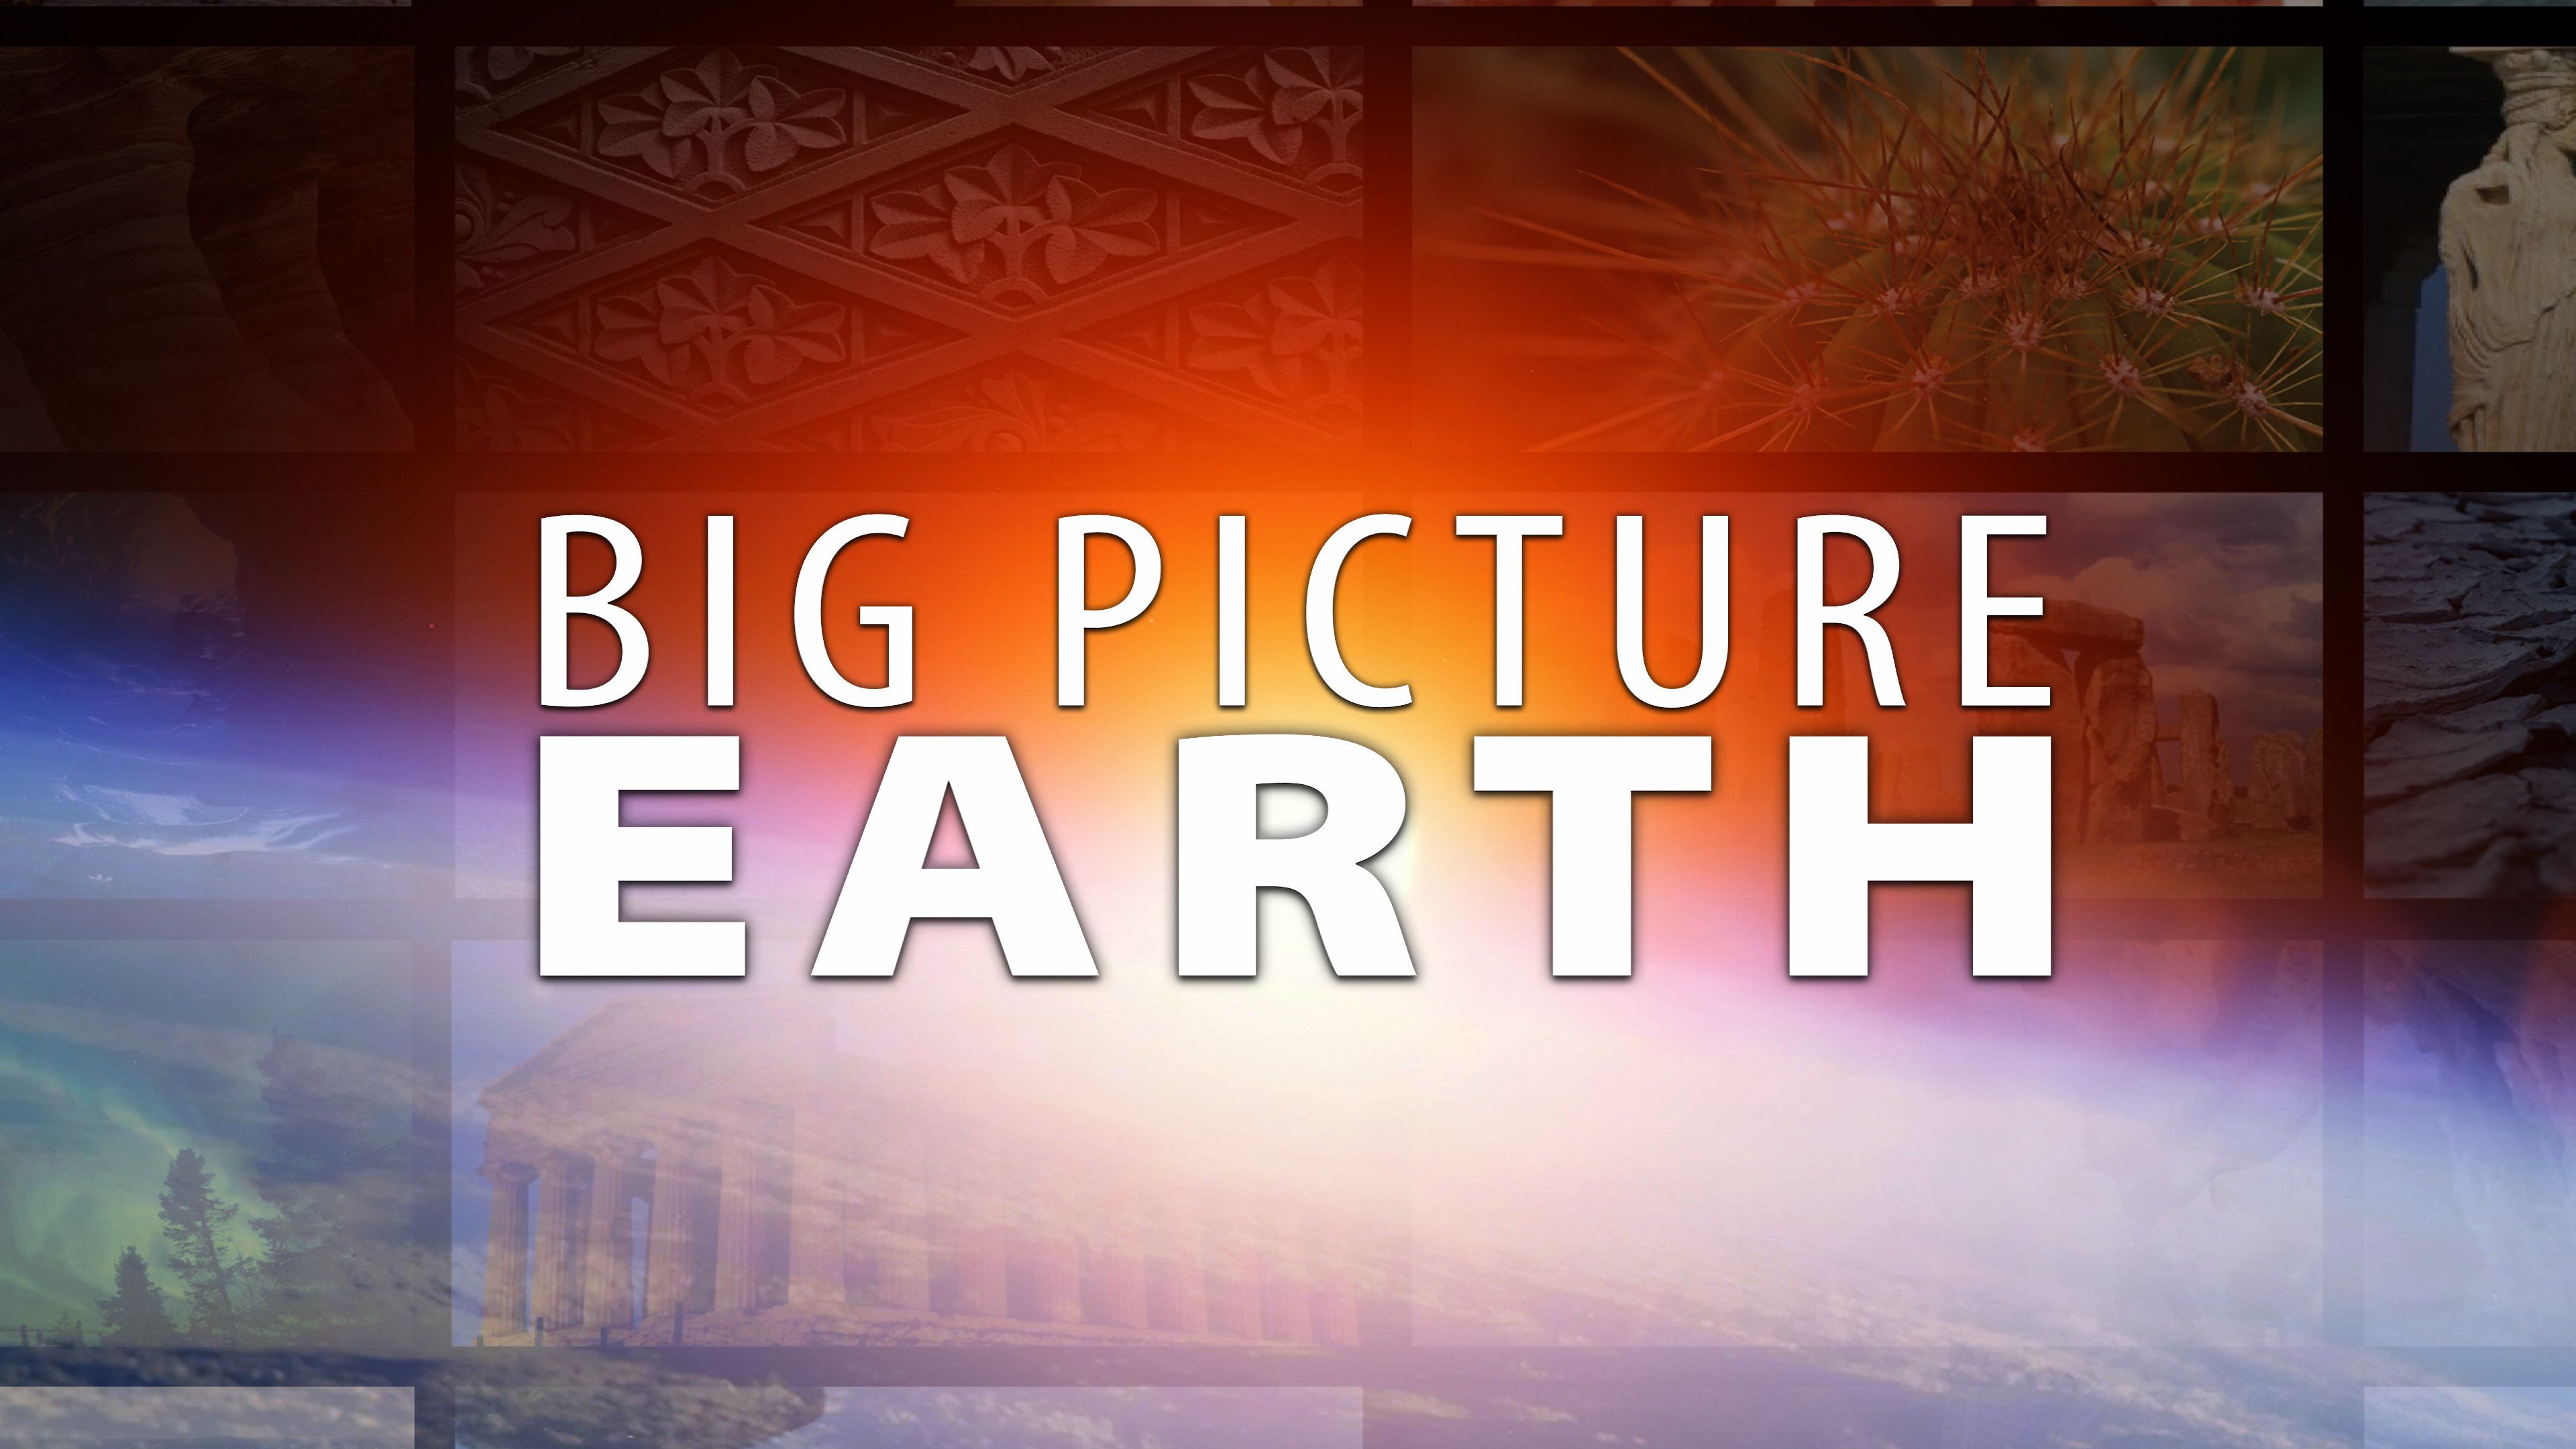 Big Picture Earth (Natural sound)